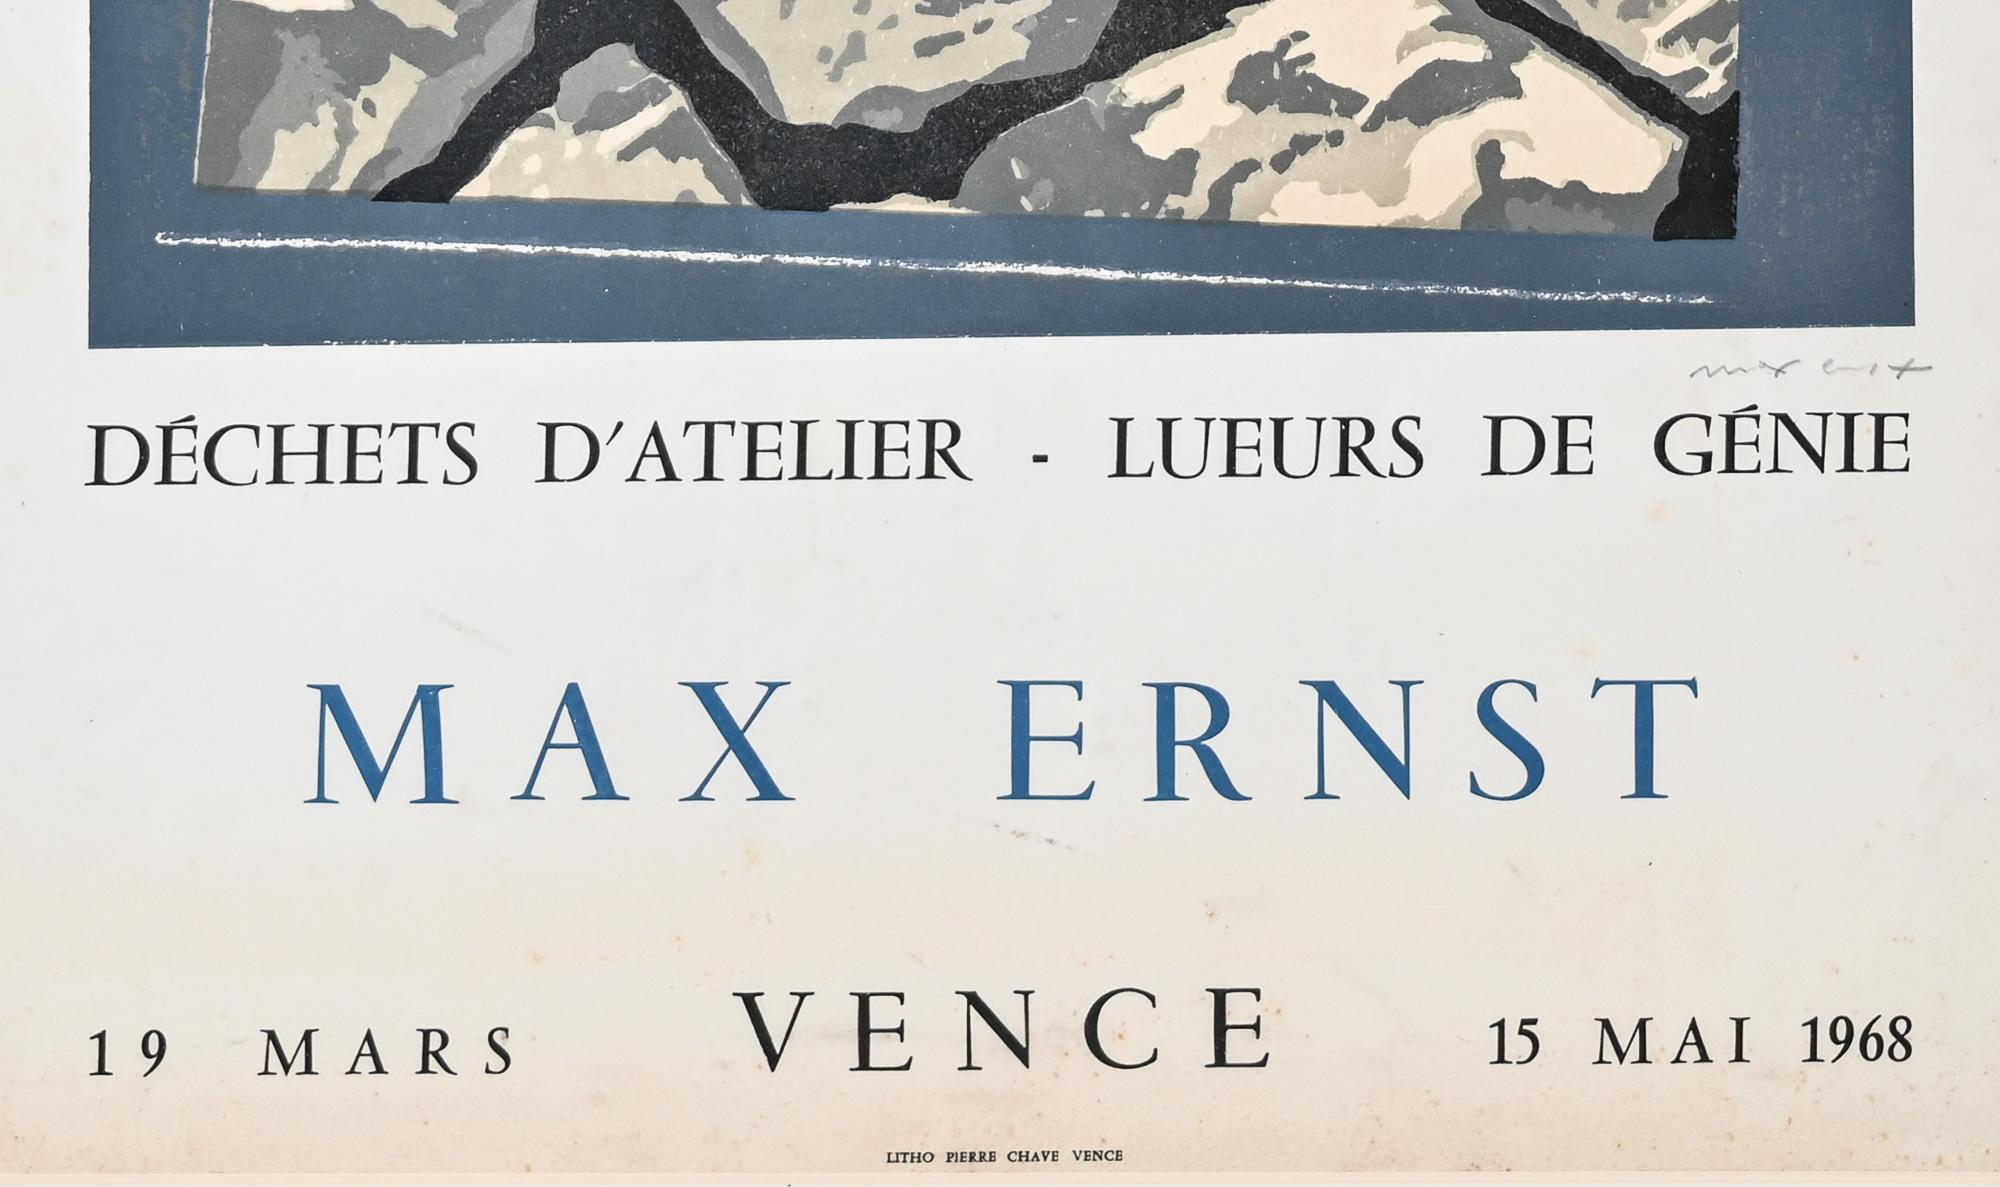 Signed Max Ernst original lithographic poster from the “Déchets d’Atelier” exhibition held at Galerie Alphonse Chave in Vence 1968
hand signed in pencil
France circa 1968,

Max Ernst initially studied art history. When he met August Macke in 1910,